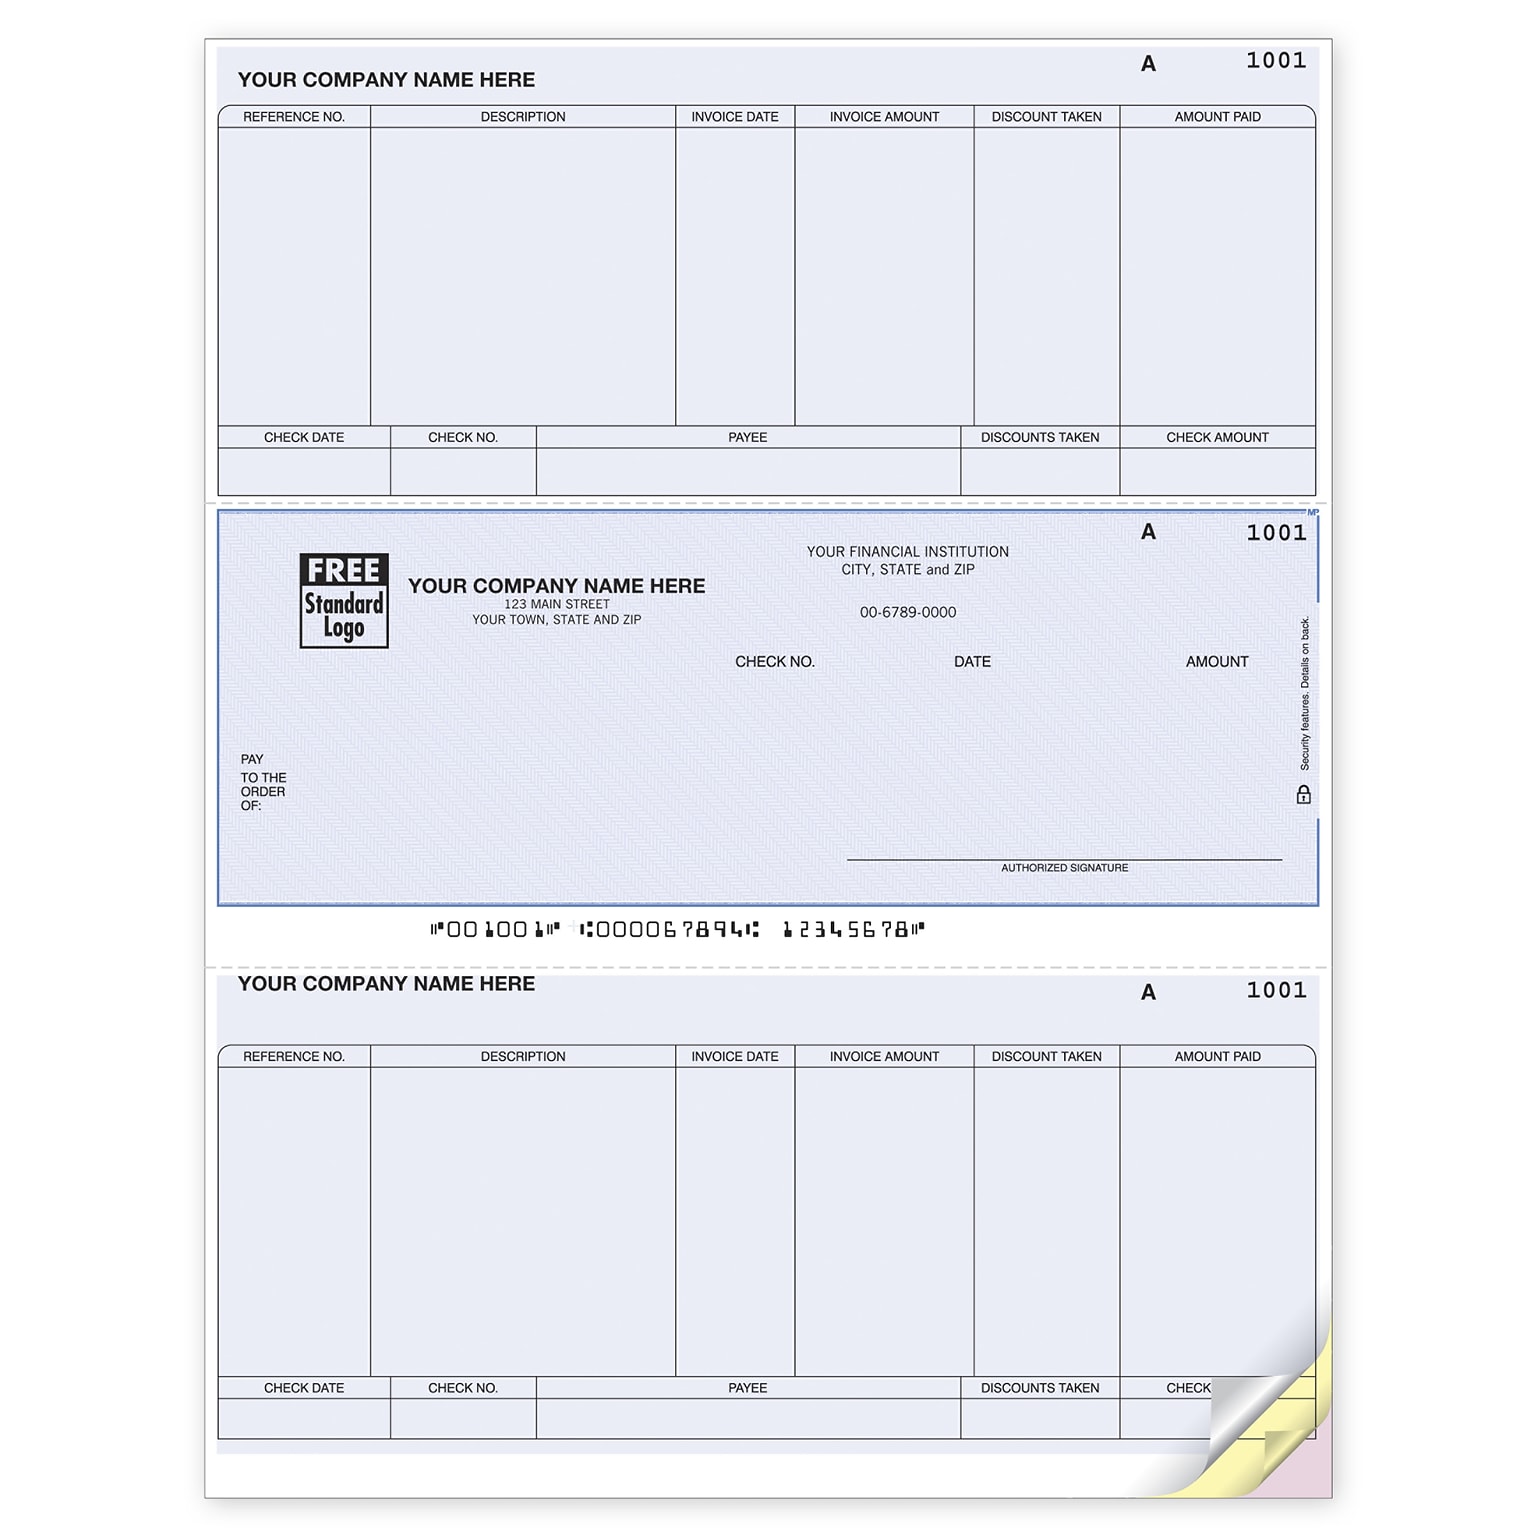 Custom Laser Middle Accounts Payable Check, 3 Ply/Triplicate, 2 Color Printing, Standard Check Color, 8-1/2 x 11, 500/Pk